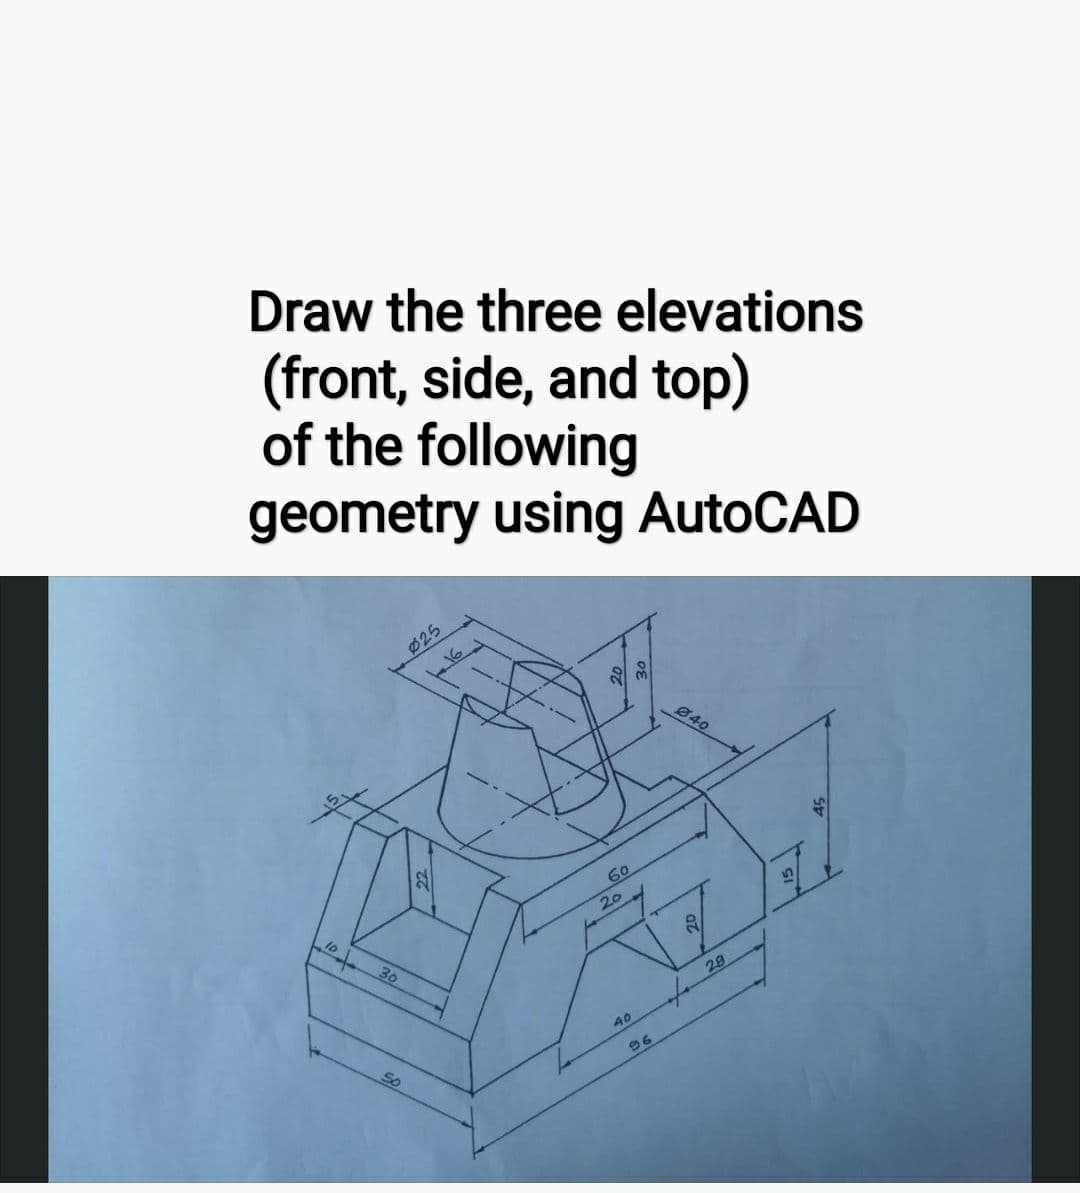 Draw the three elevations
(front, side, and top)
of the following
geometry using AutoCAD
23
10+
30
025
16
So
60
20
40
96
040
2
28